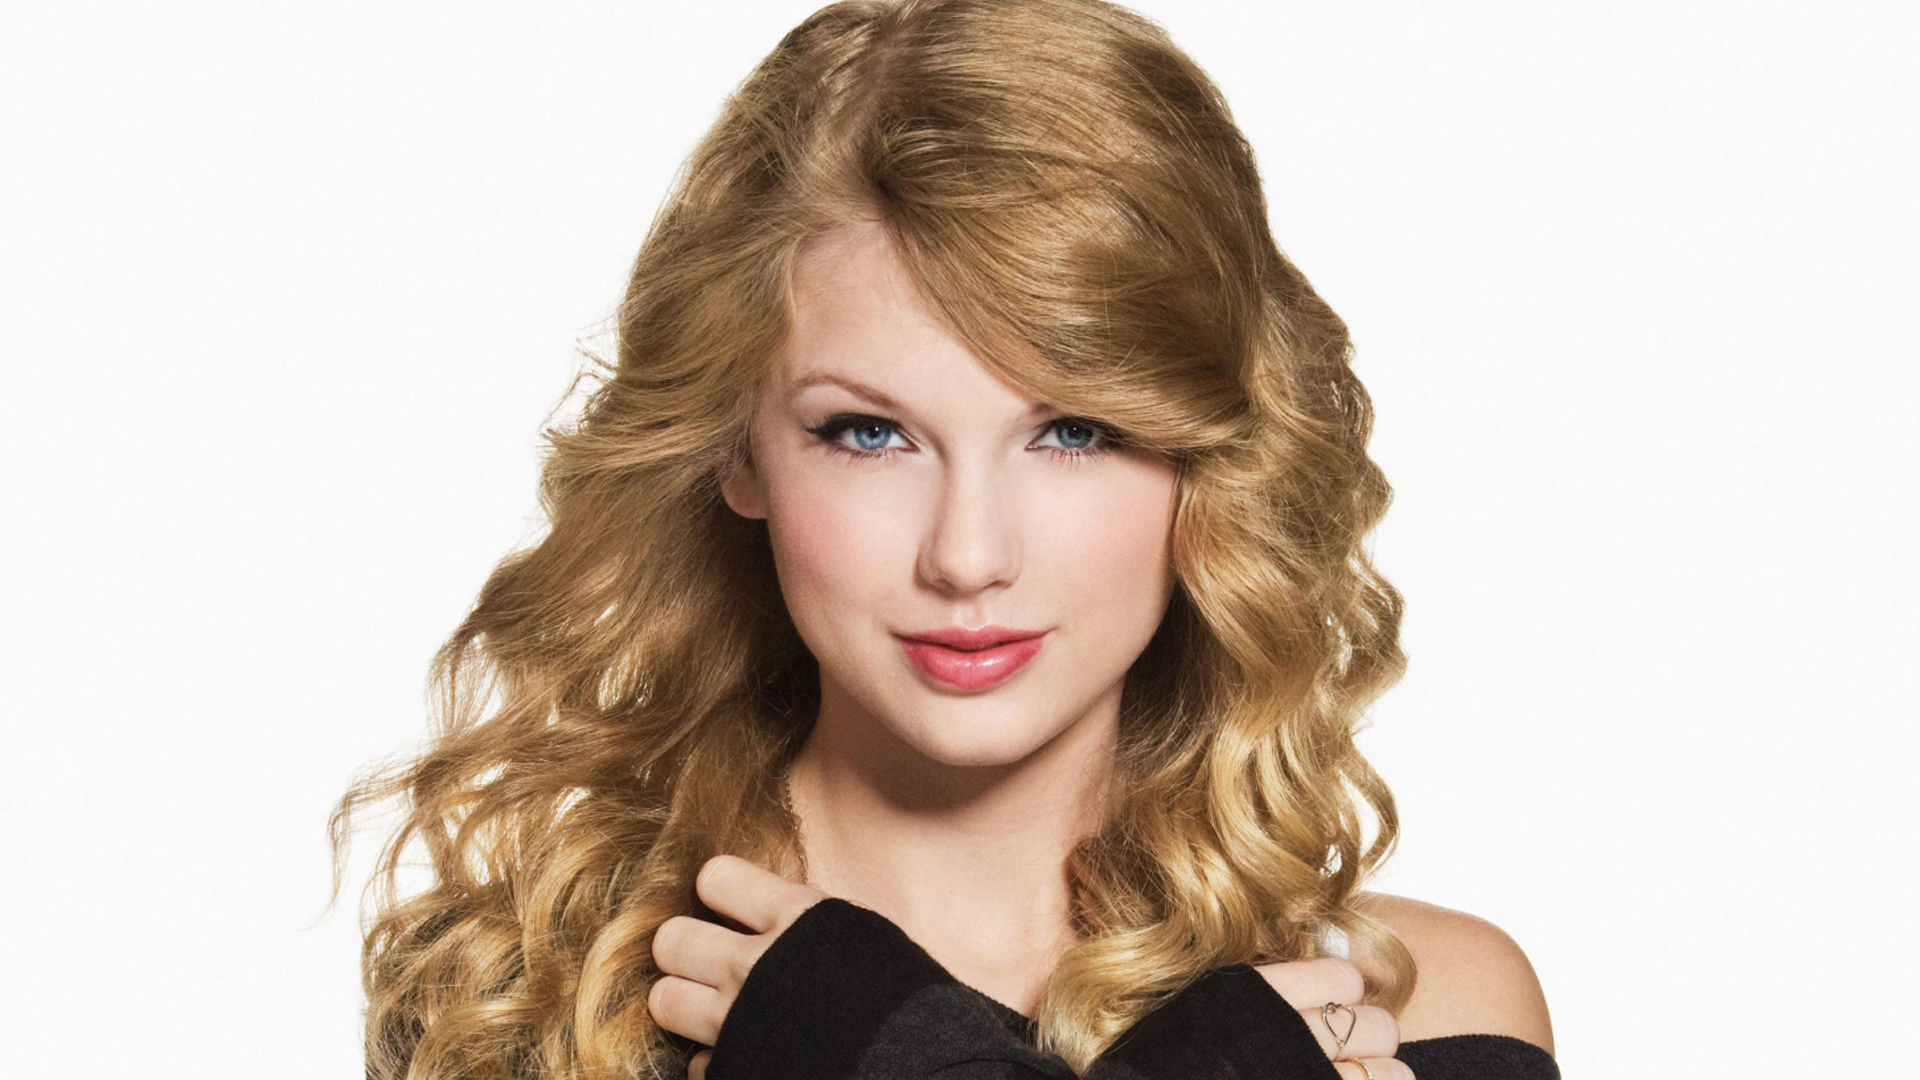 Taylor Swift Wallpaper Collection For